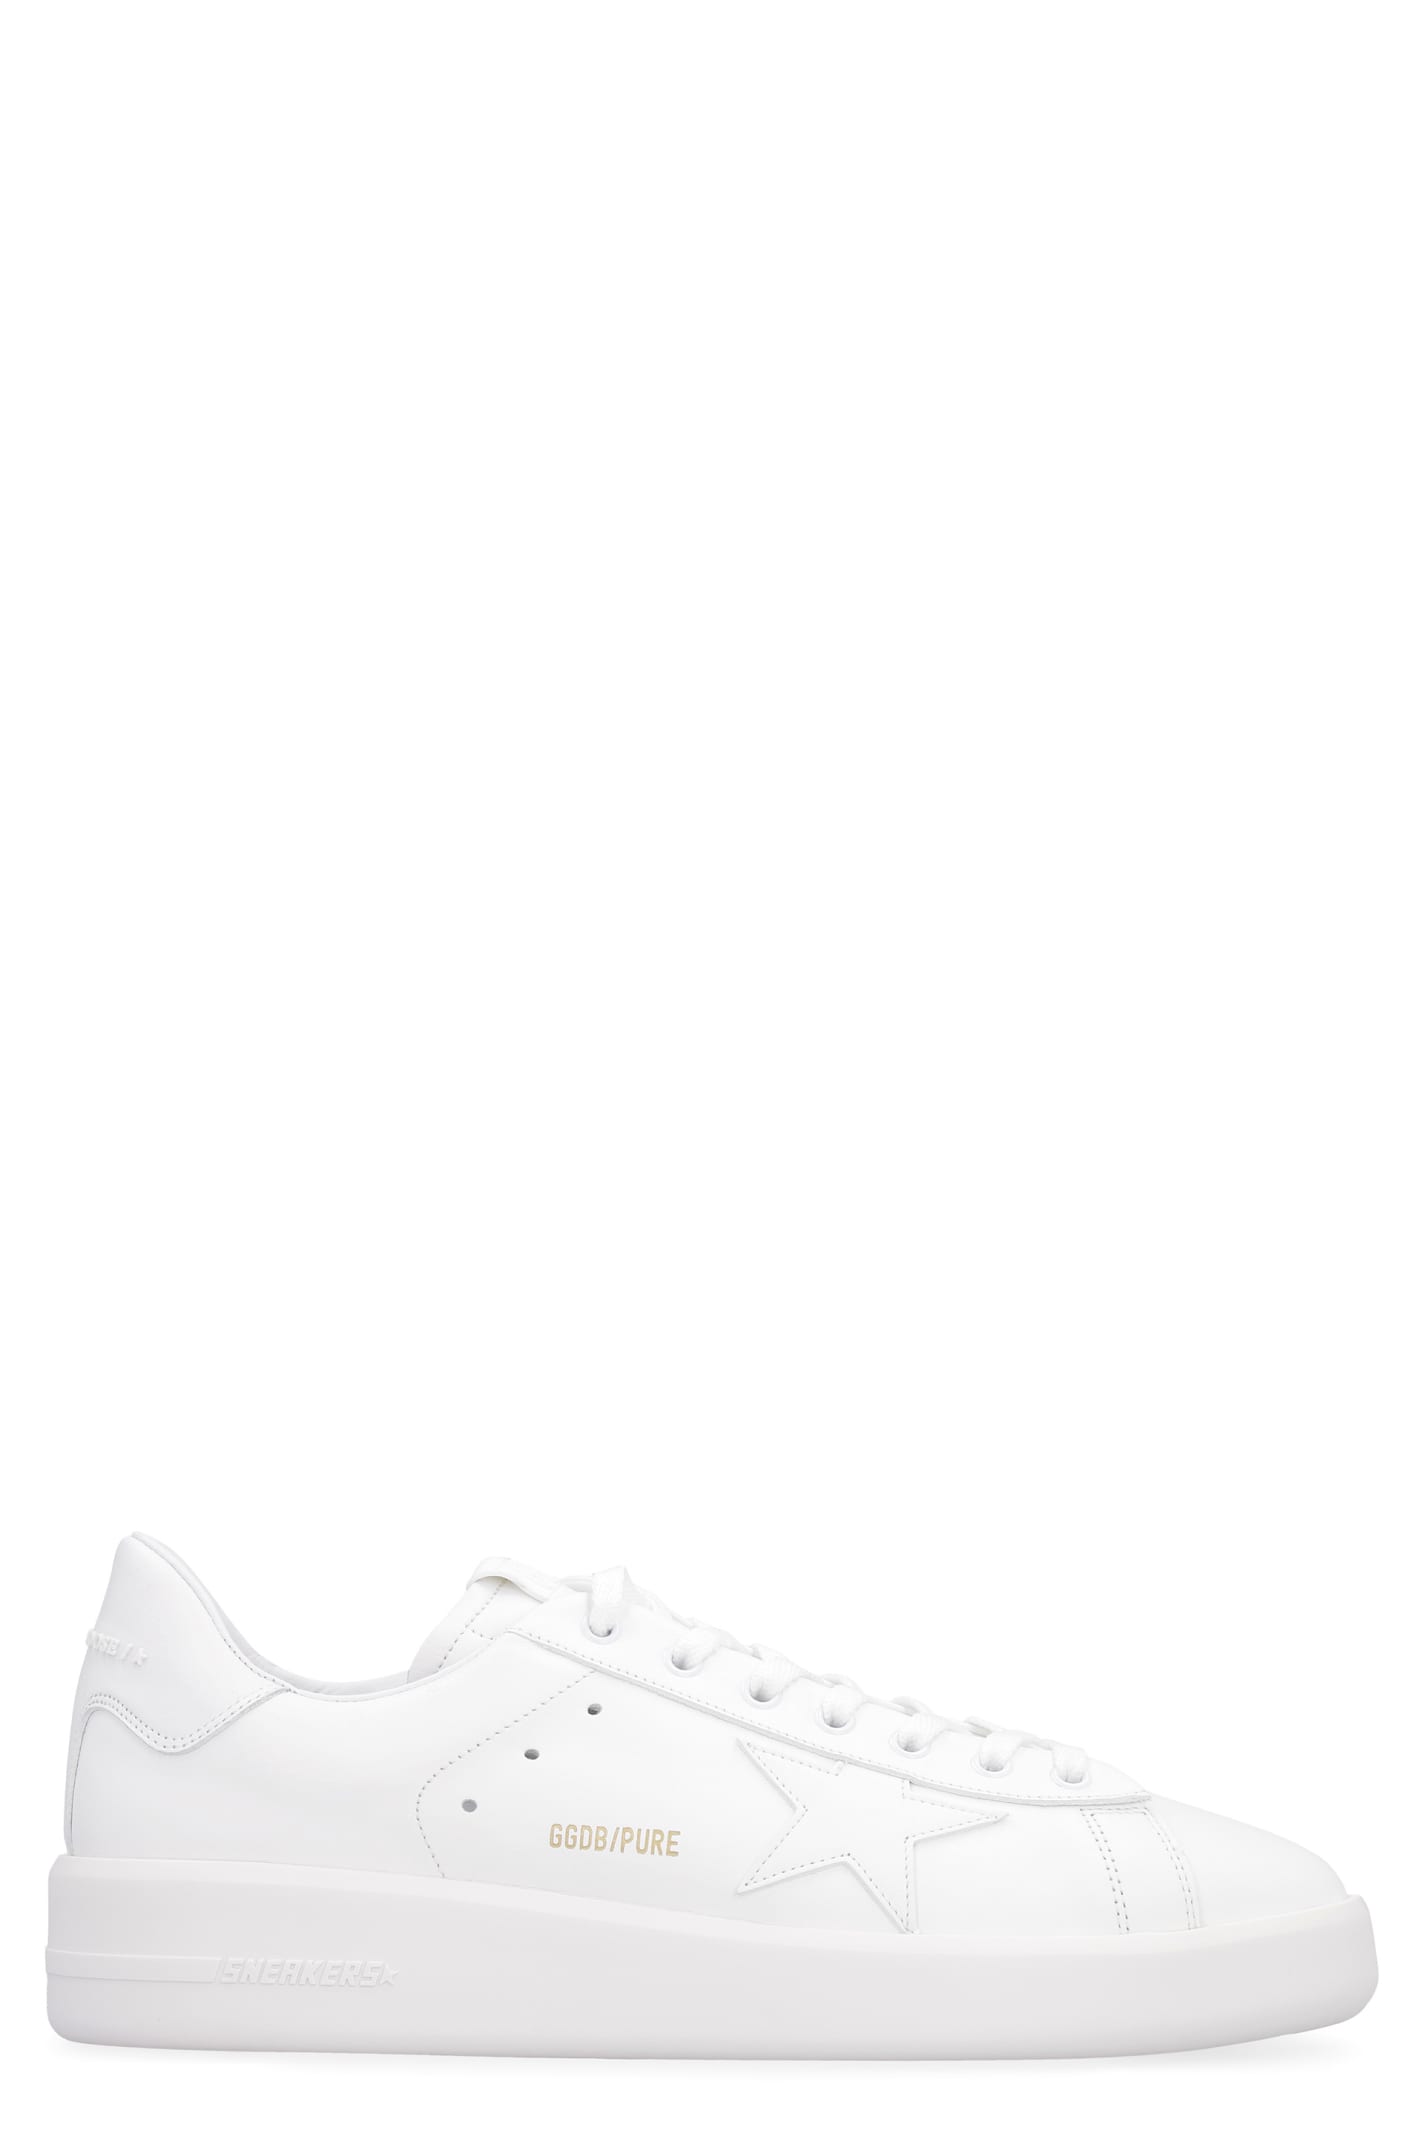 Golden Goose Pure Star Leather Low-top Sneakers